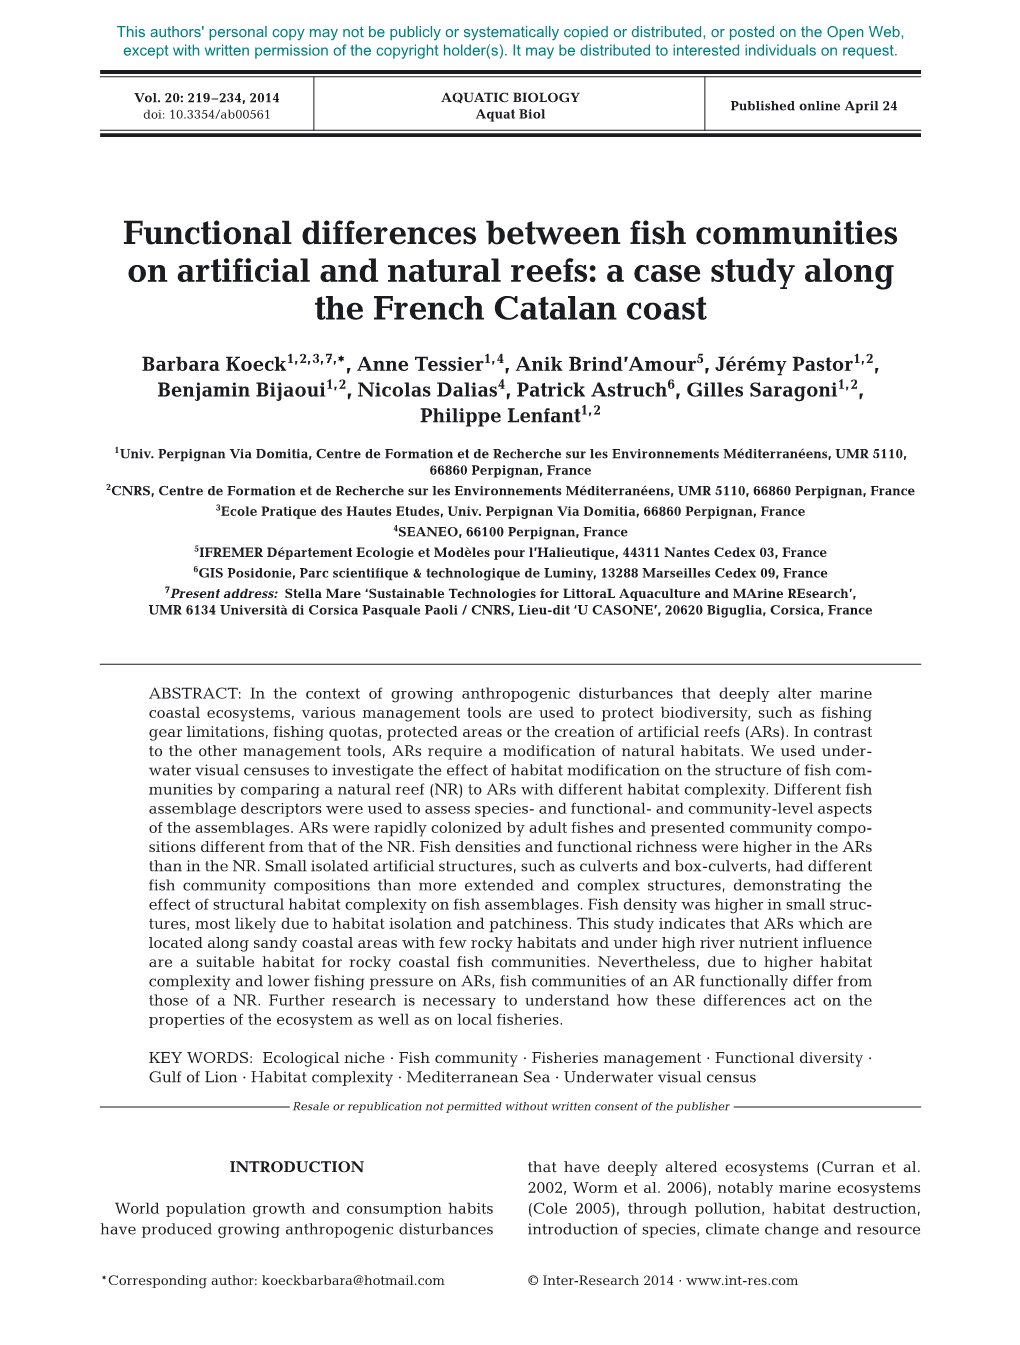 Functional Differences Between Fish Communities on Artificial and Natural Reefs: a Case Study Along the French Catalan Coast